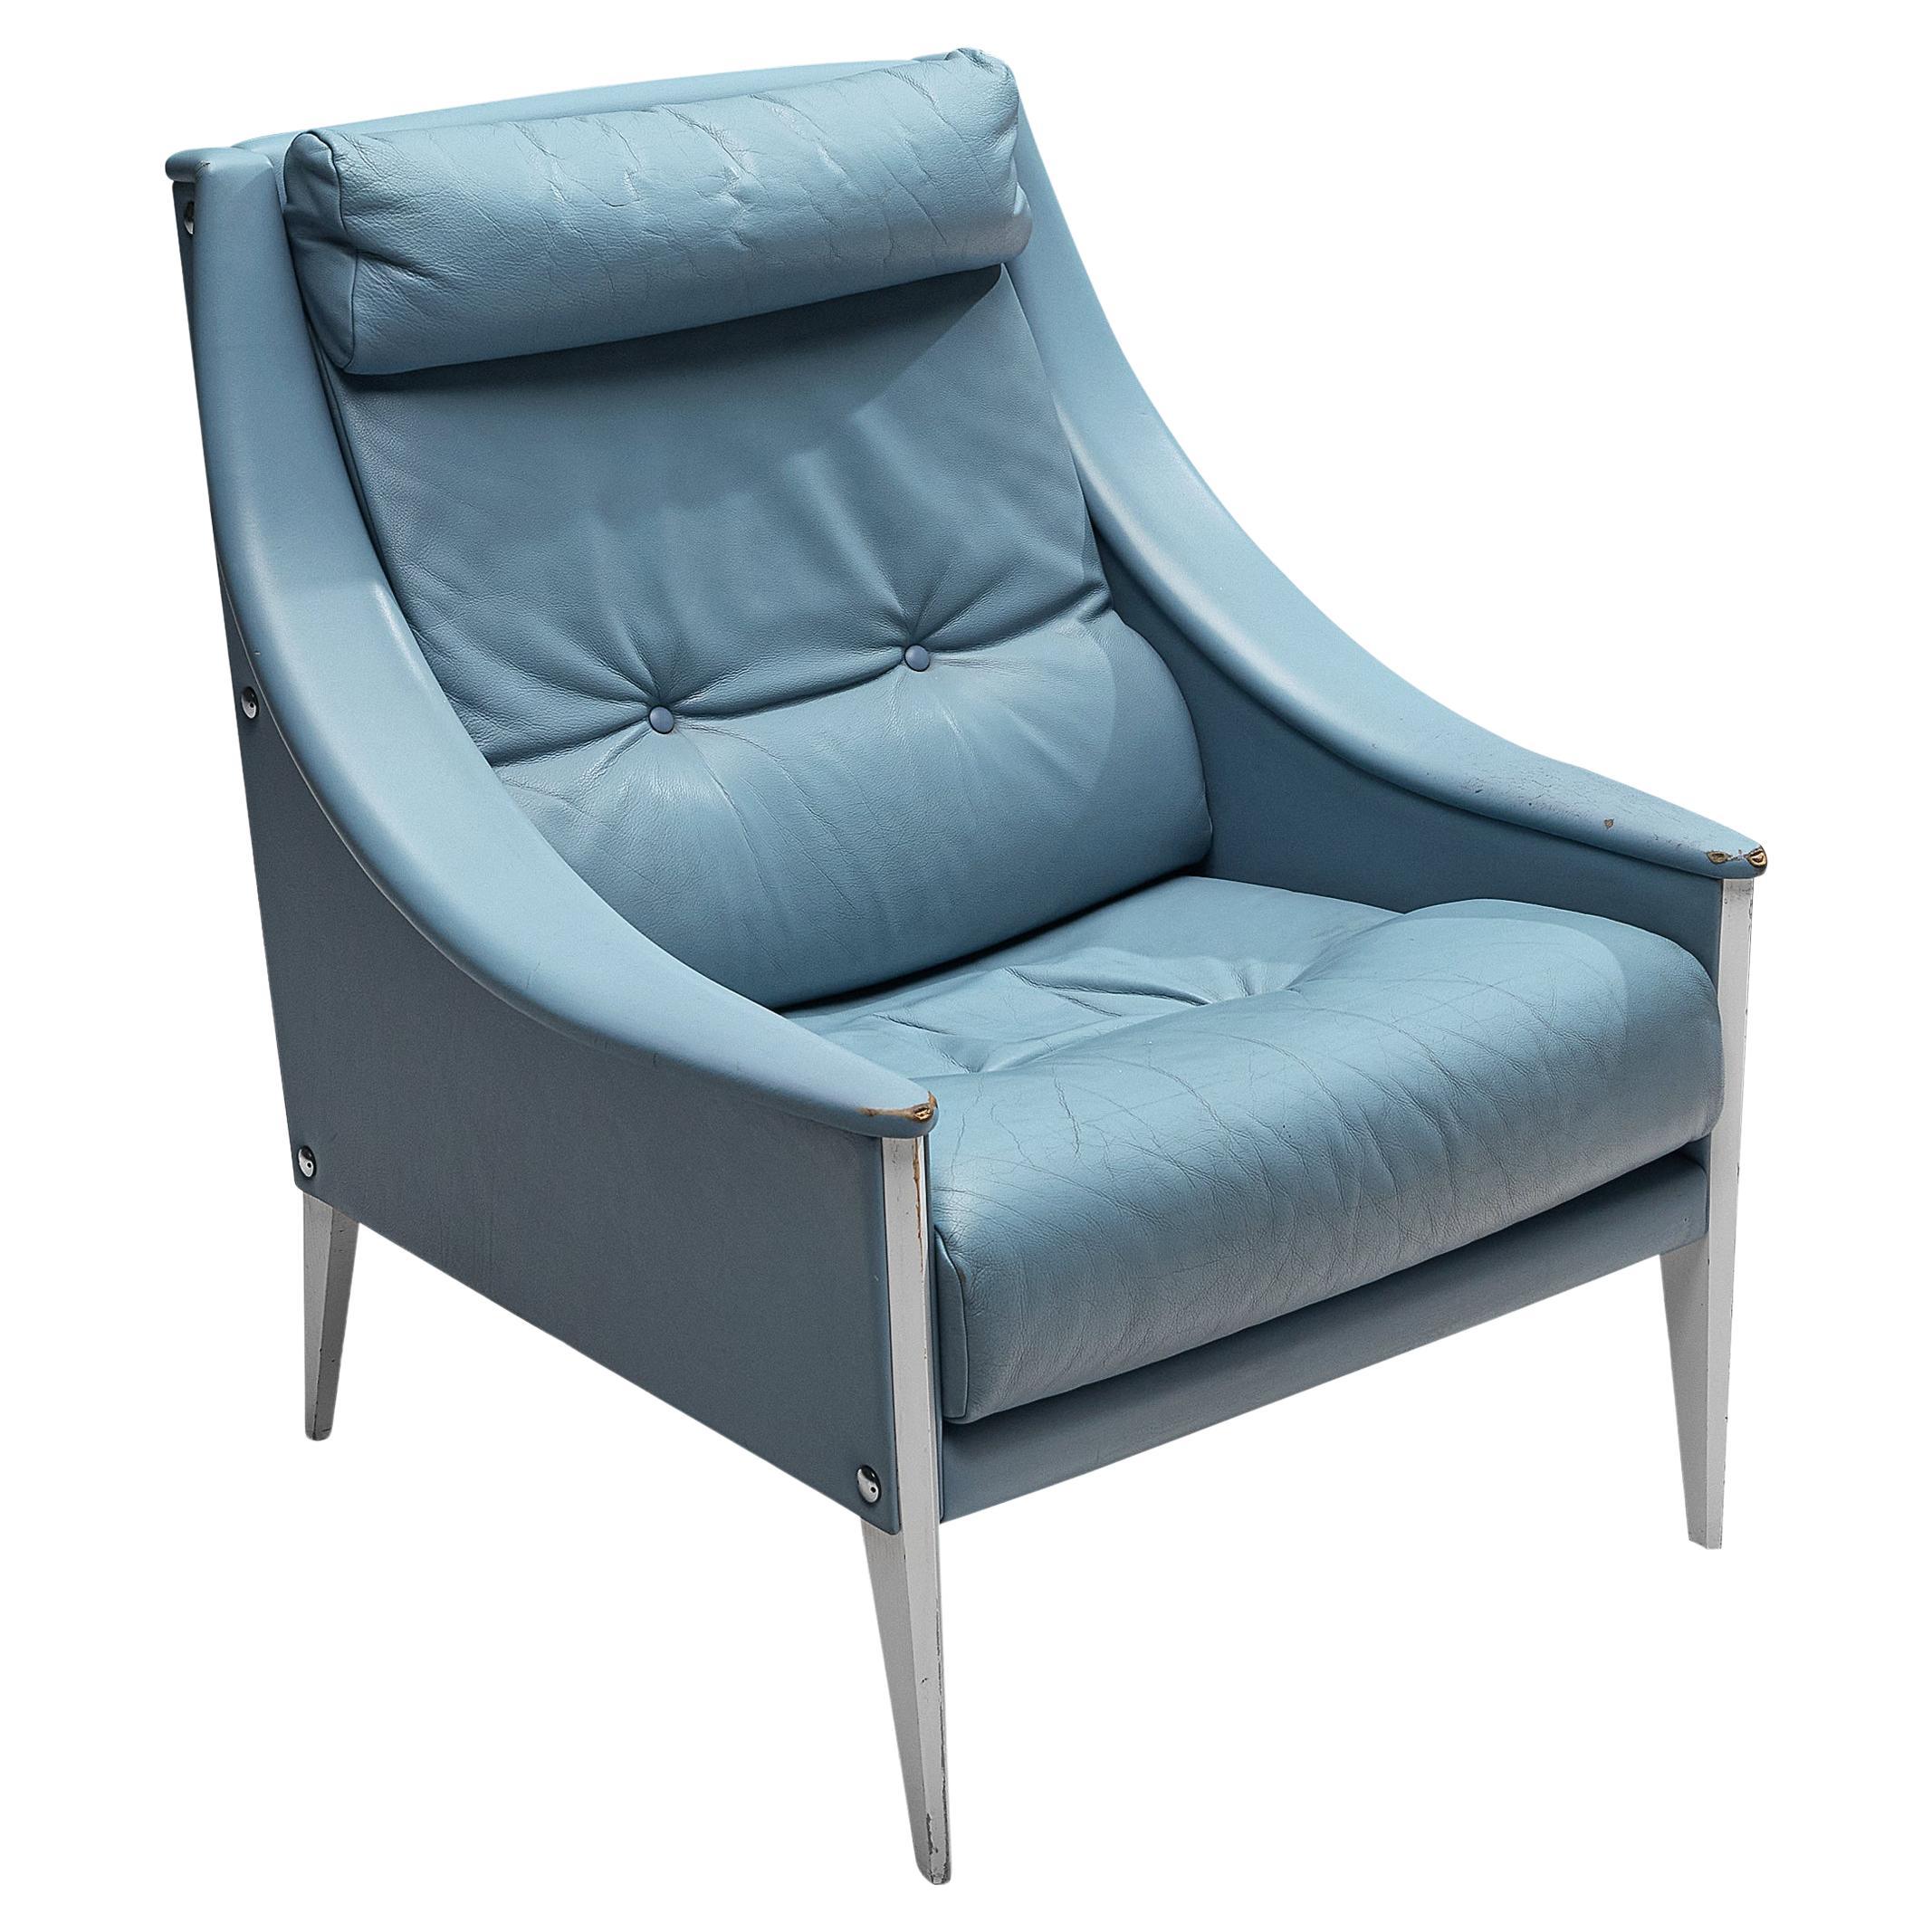 Gio Ponti for Poltrona Frau Lounge Chair 'Dezza' in Light Blue Leather For Sale